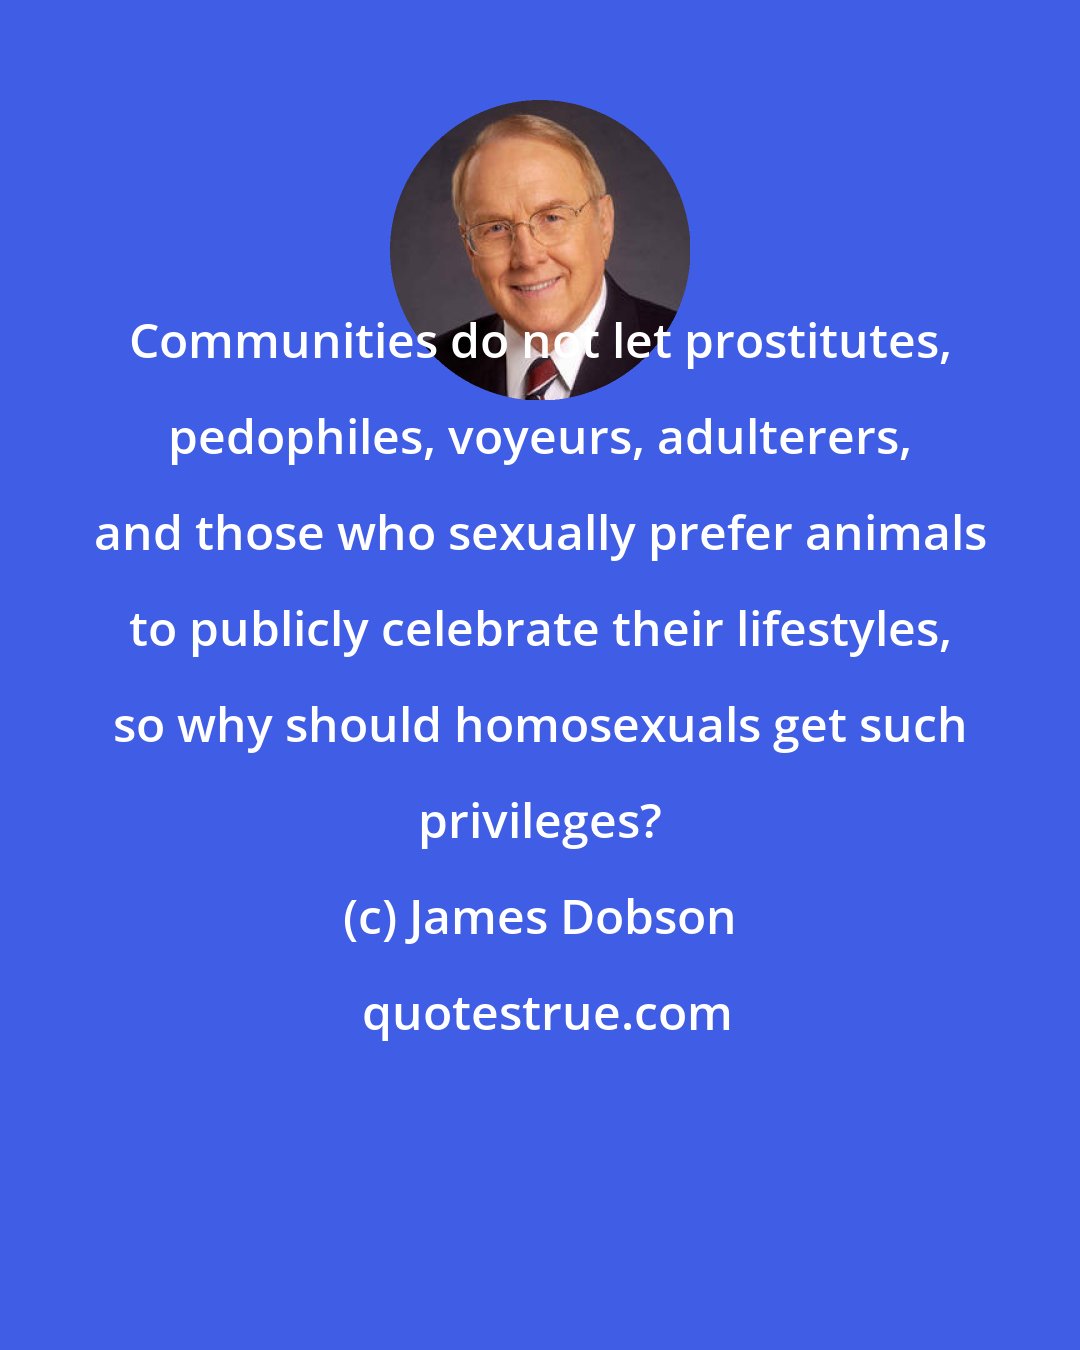 James Dobson: Communities do not let prostitutes, pedophiles, voyeurs, adulterers, and those who sexually prefer animals to publicly celebrate their lifestyles, so why should homosexuals get such privileges?